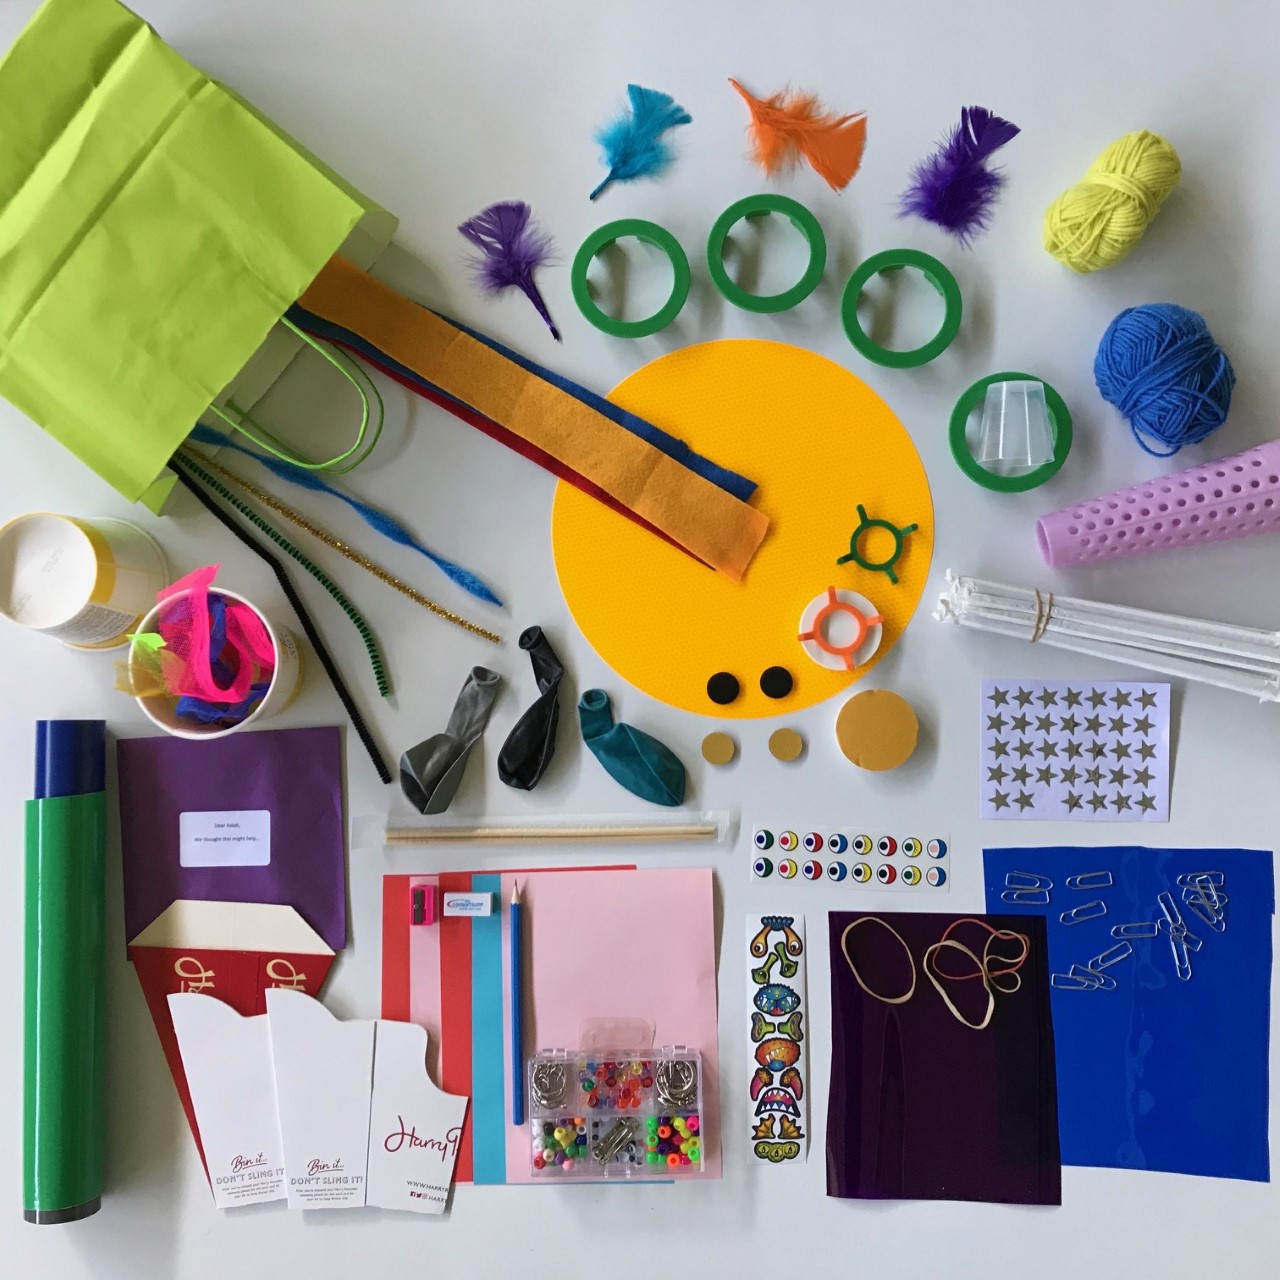 Various arts and crafts resources including cardboard, stickers and feathers spread out on a table